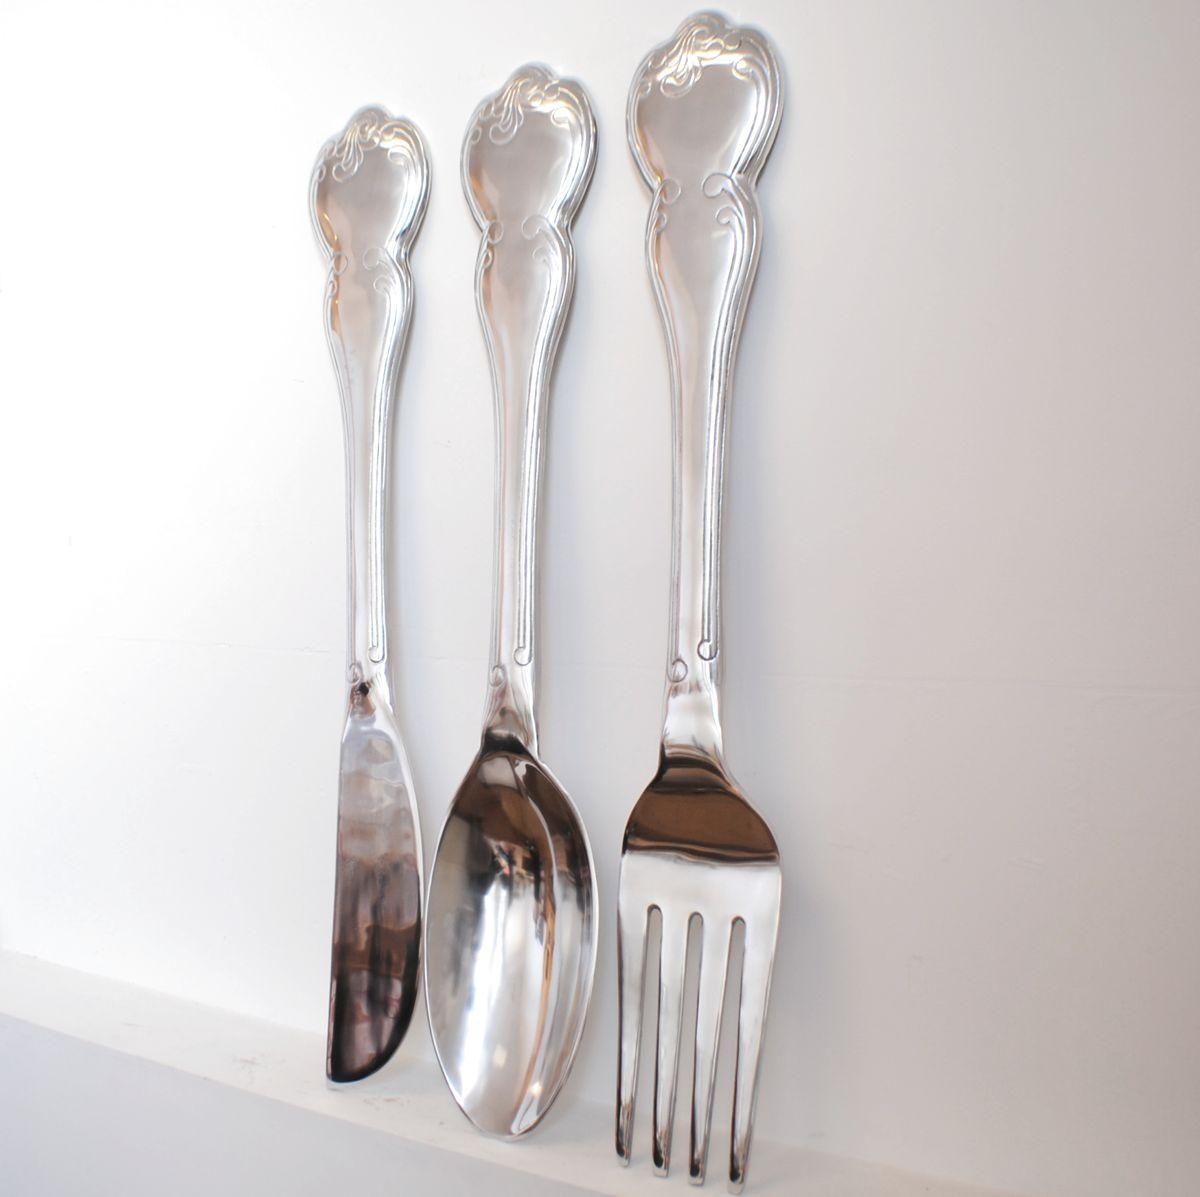 Extra Large Spoon | Fork | Knife | Cutlery Wall Set Pertaining To Big Spoon And Fork Wall Decor (View 13 of 20)